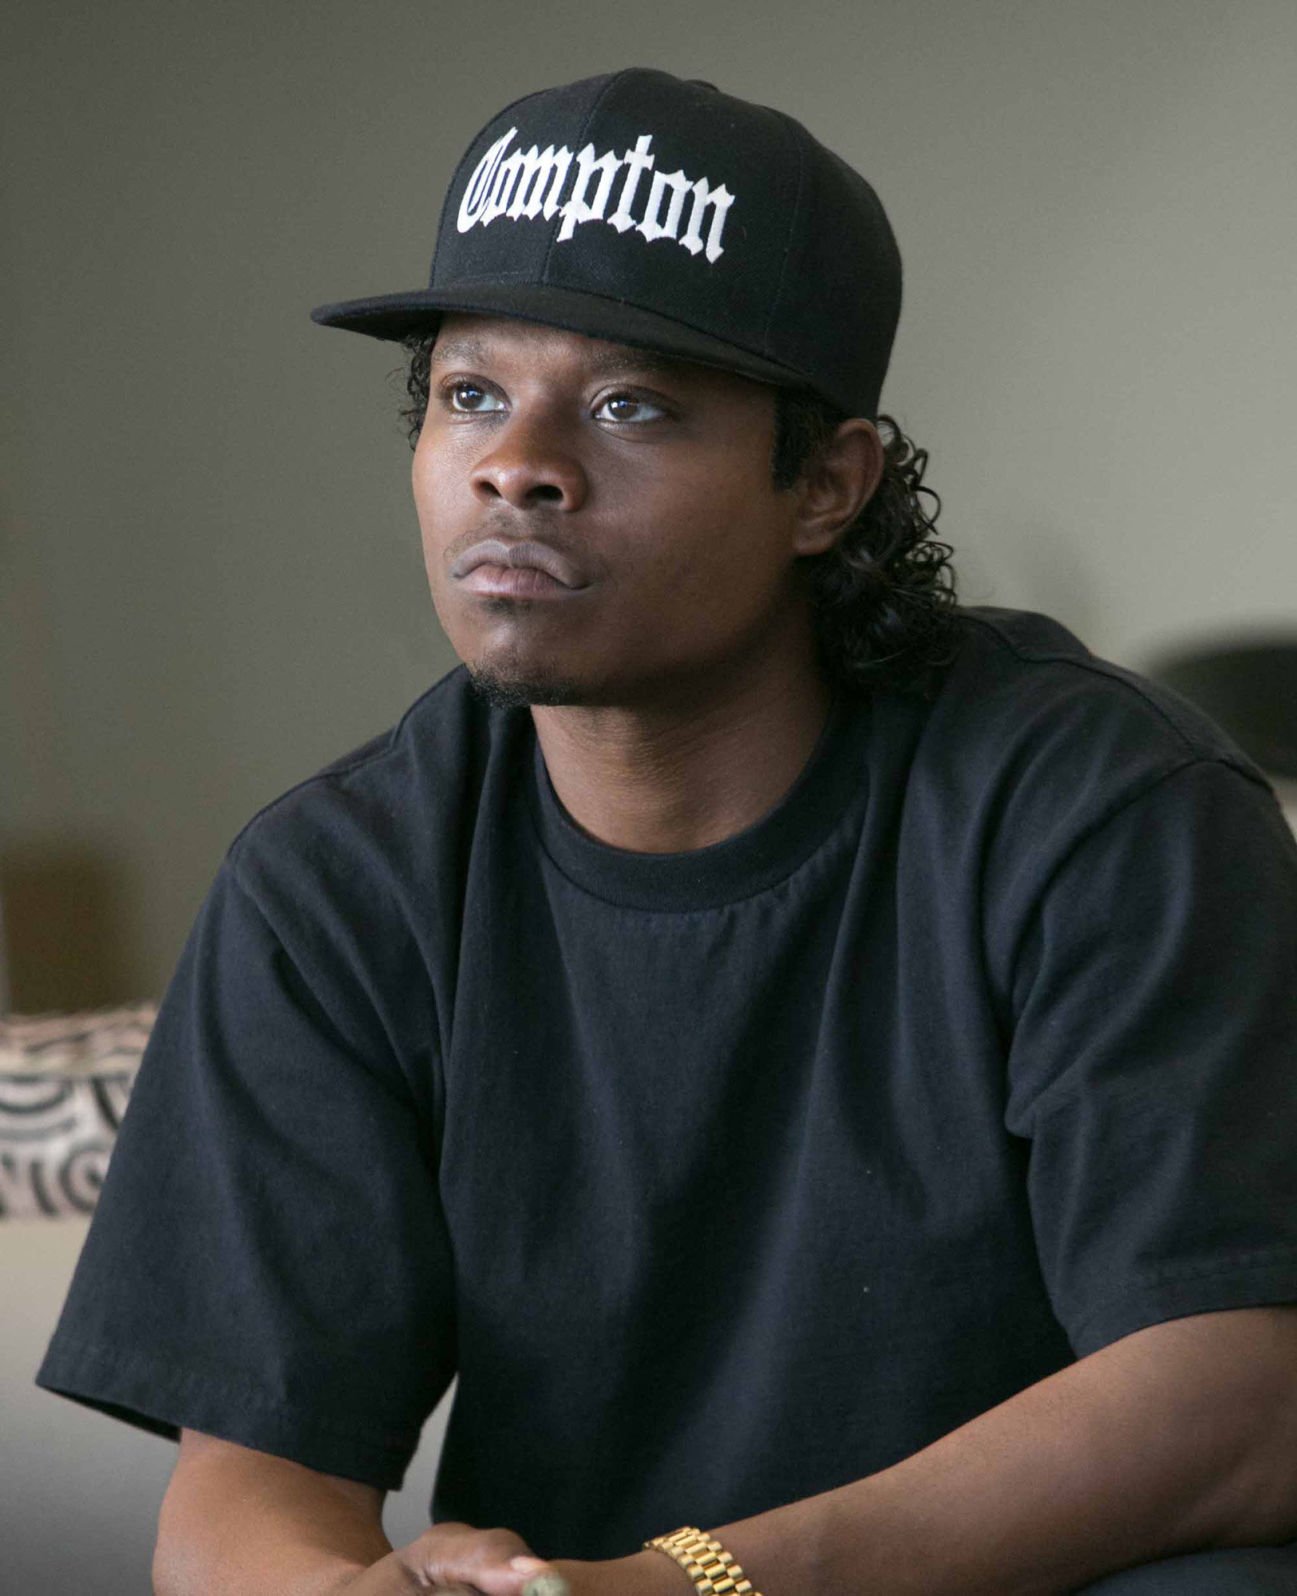 where can watch straight outta compton